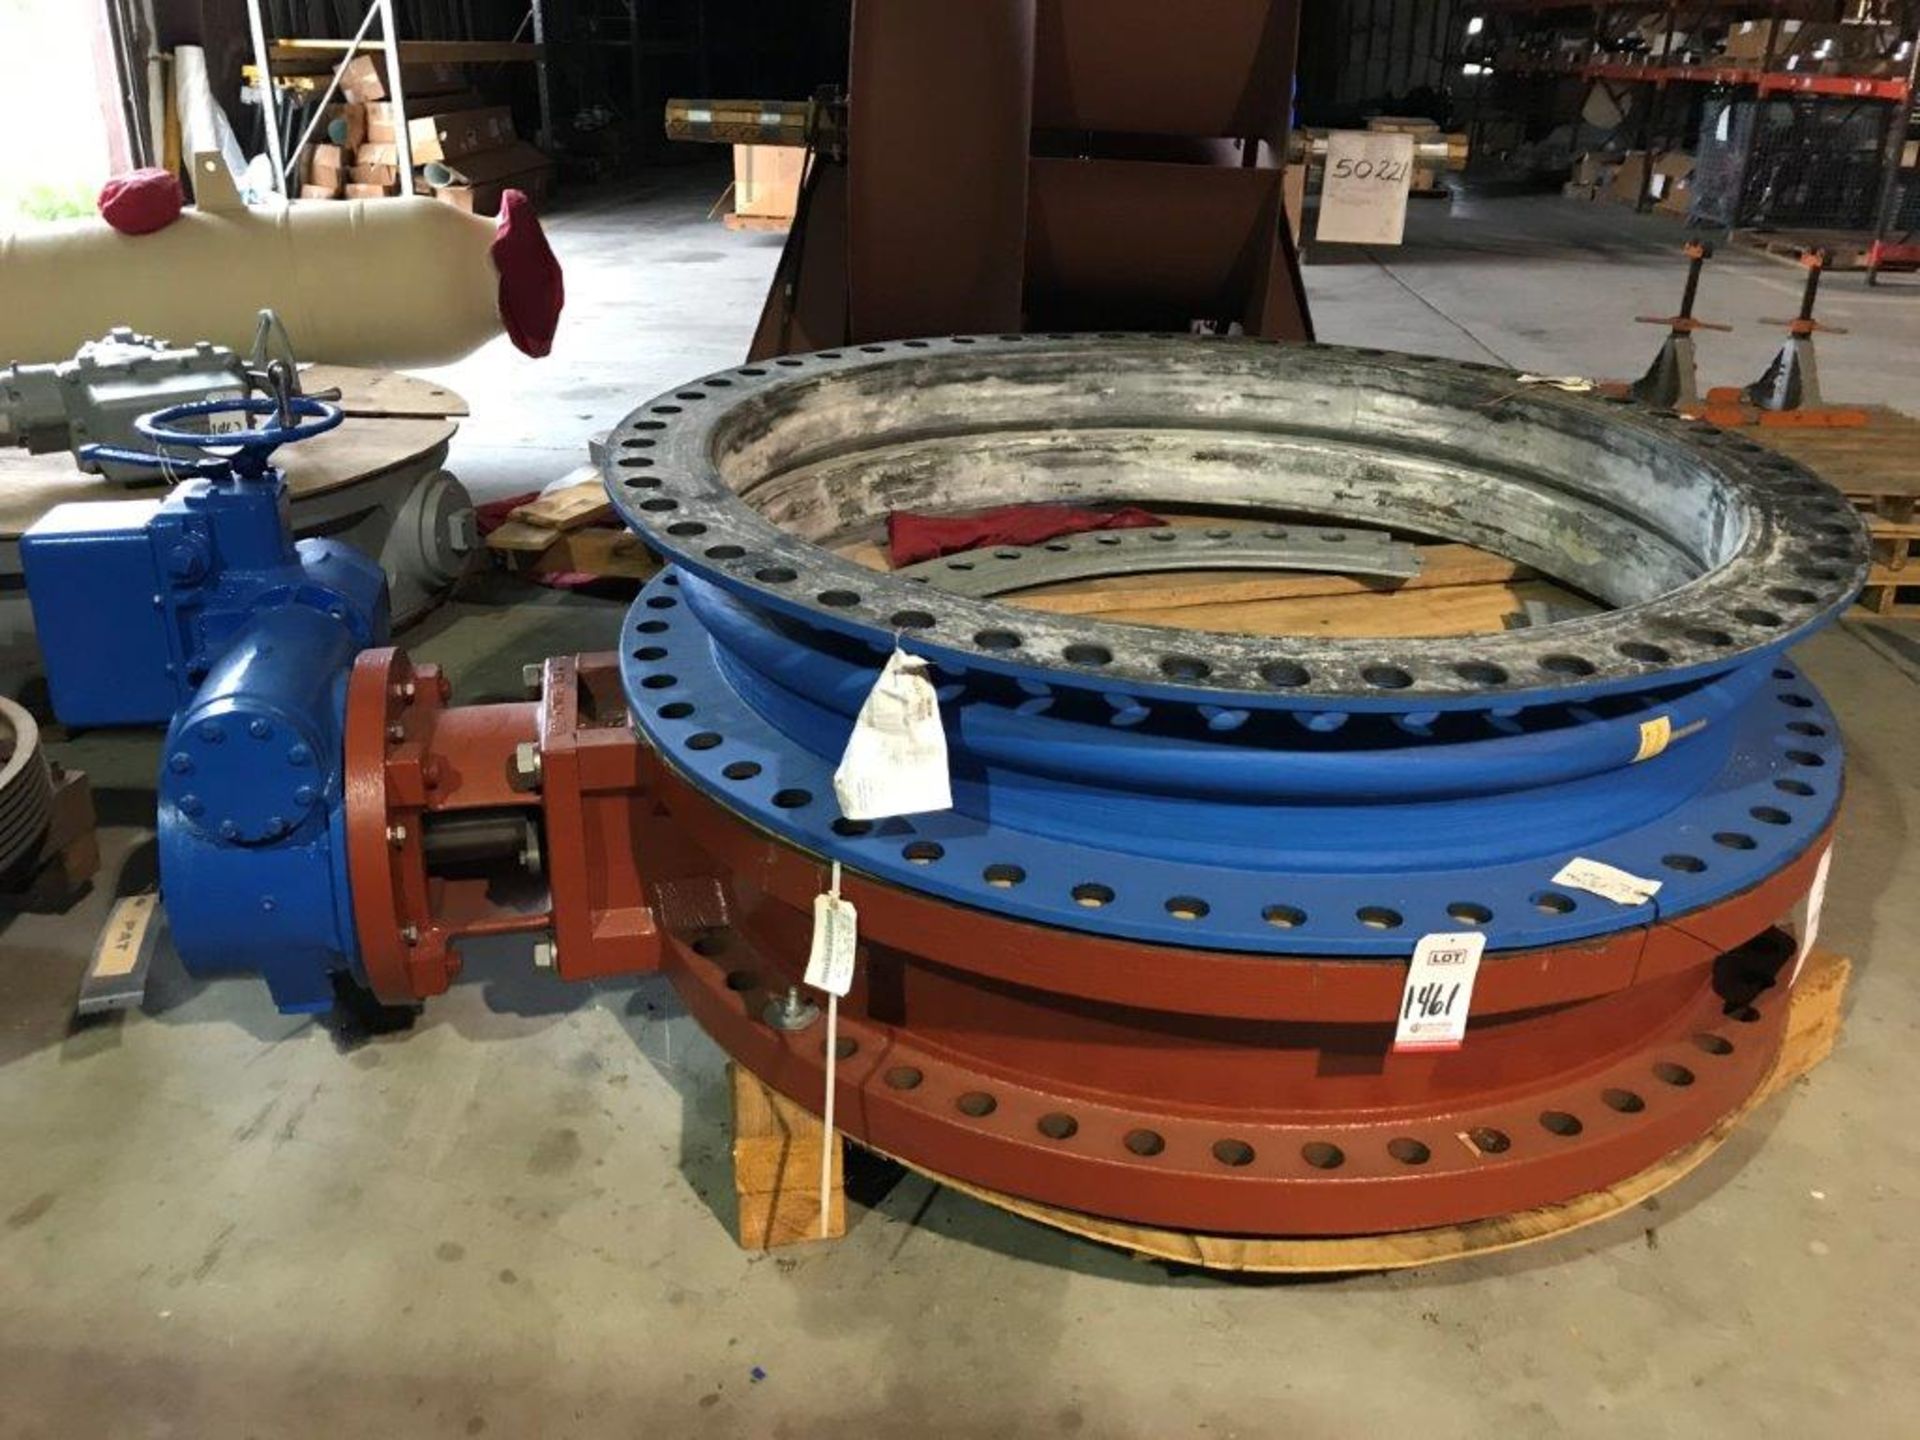 BUTTERFLY VALVE 60", EXPANSION JOINT 60" X 12-1/4" W/ LIMITORQUE SMB 0 VALVE ACTUATOR, 1 HP 230/